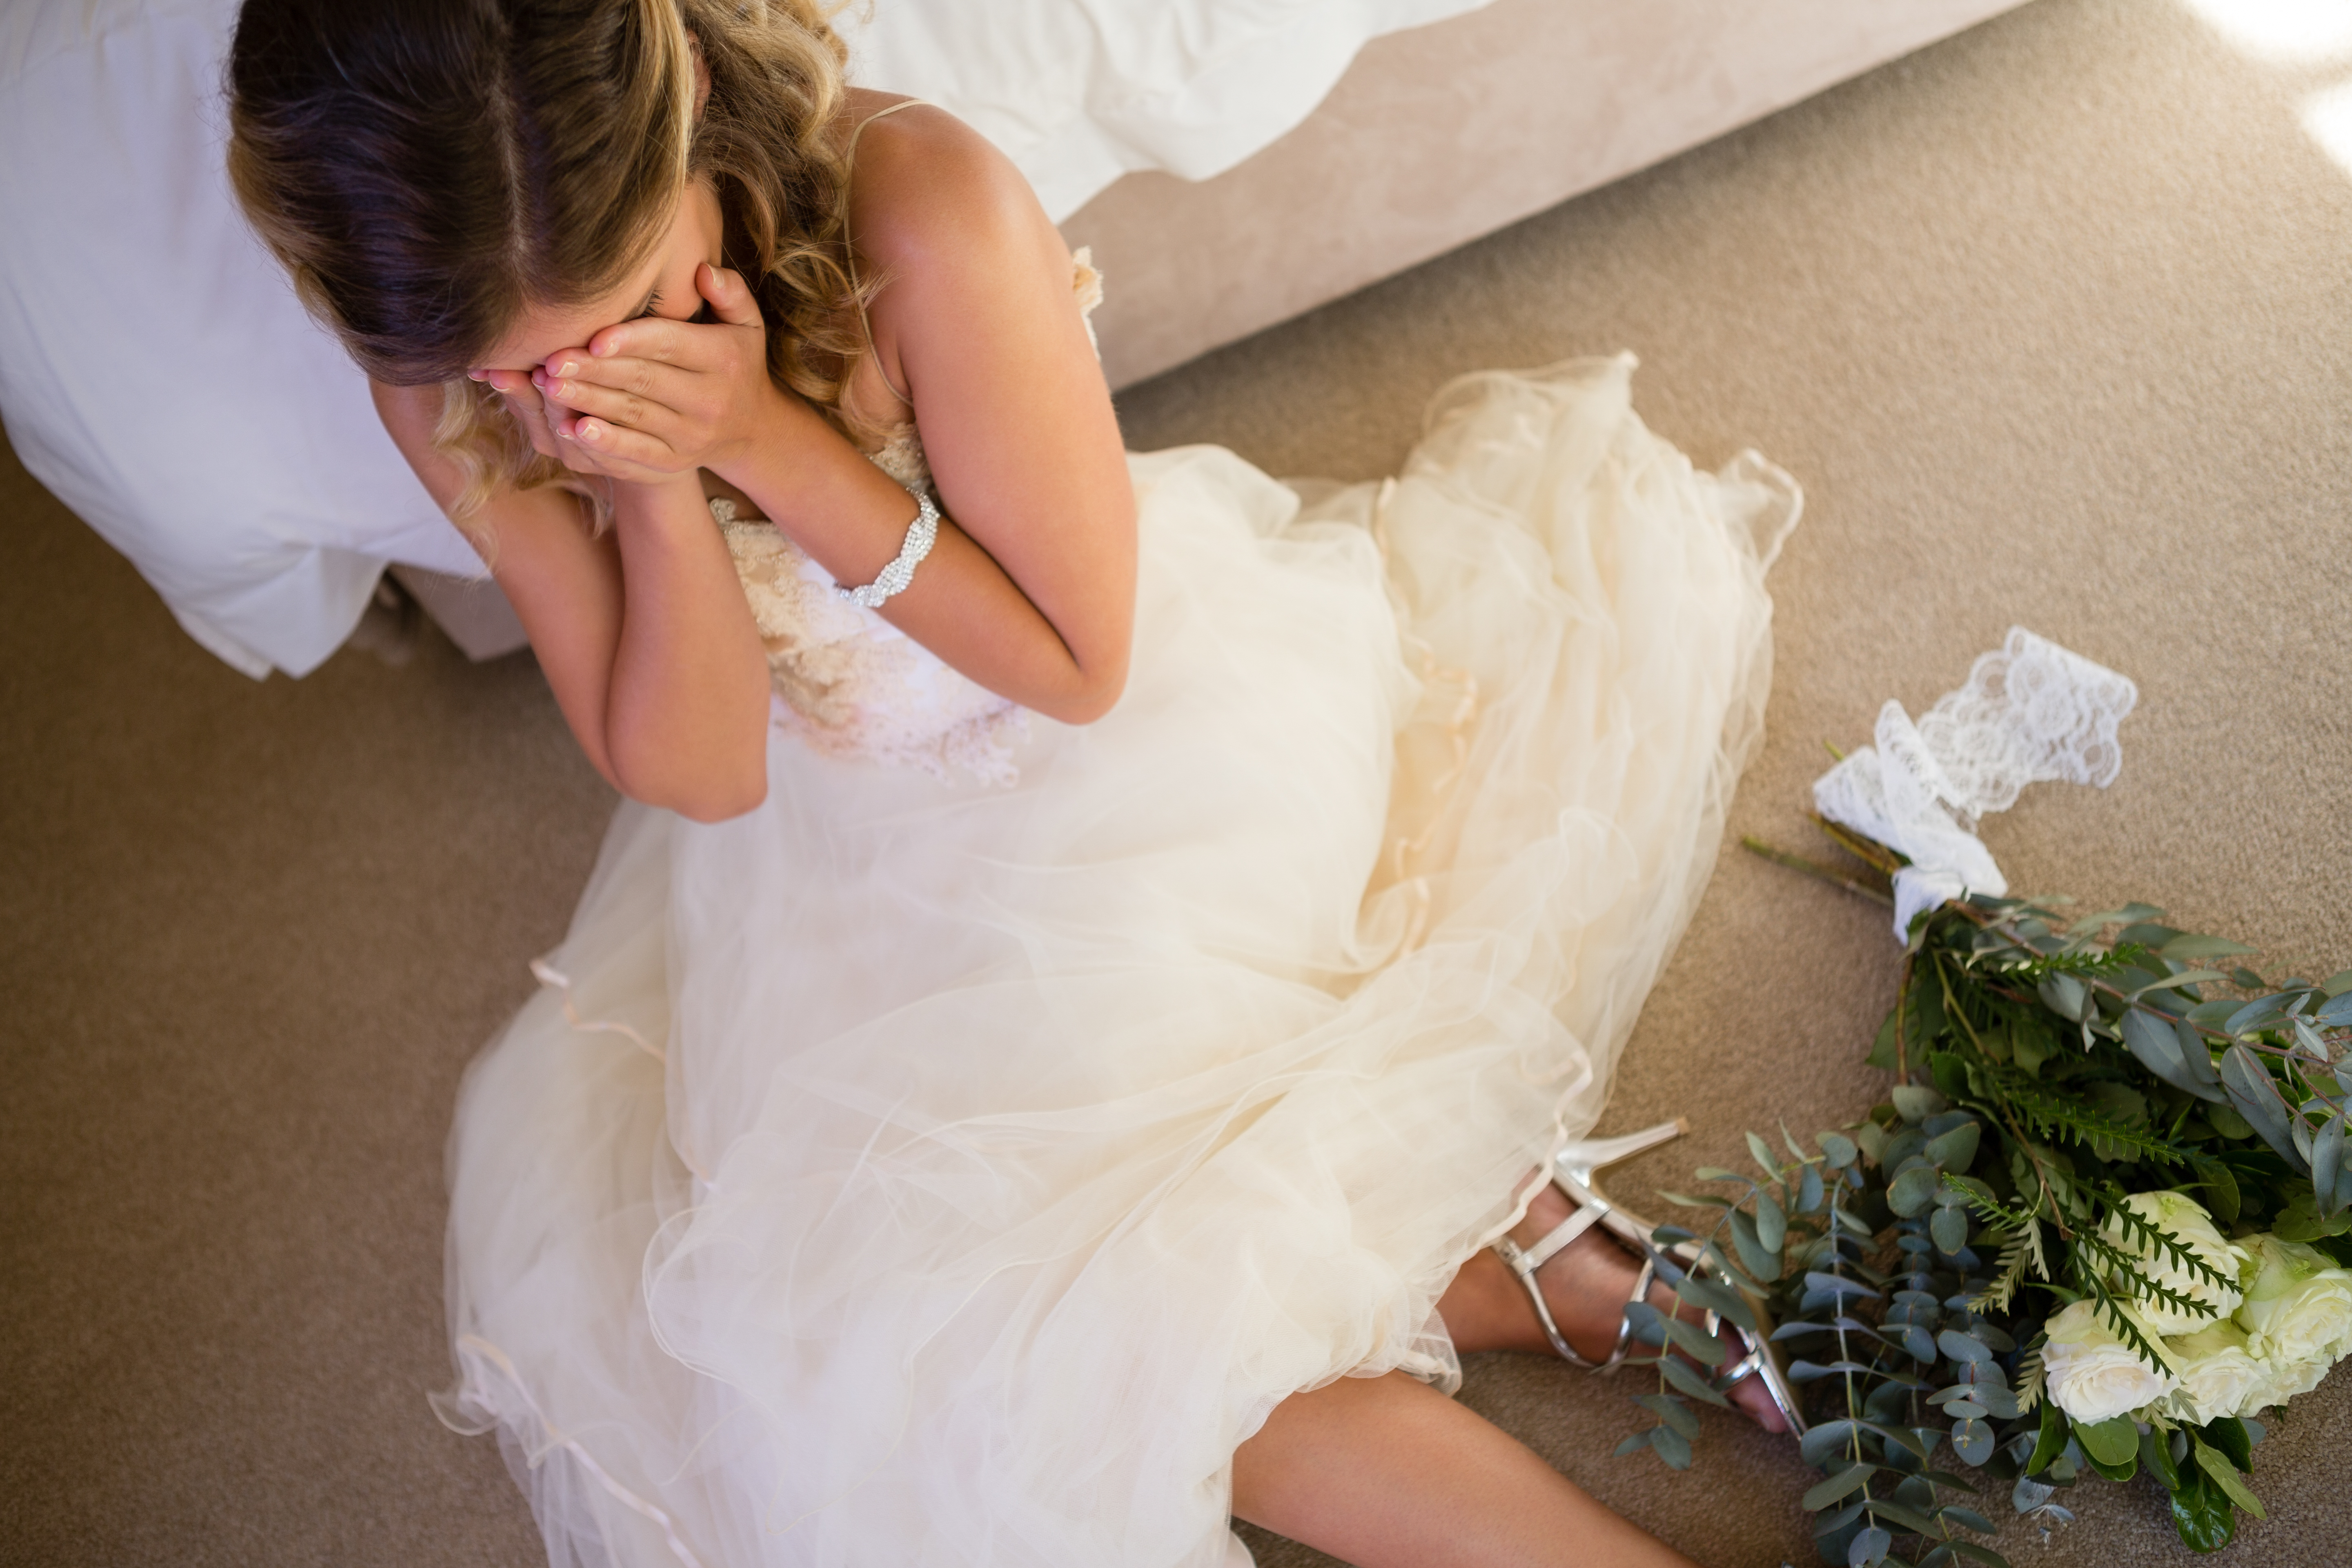 A woman cries on the floor in a wedding dress | Source: Shutterstock